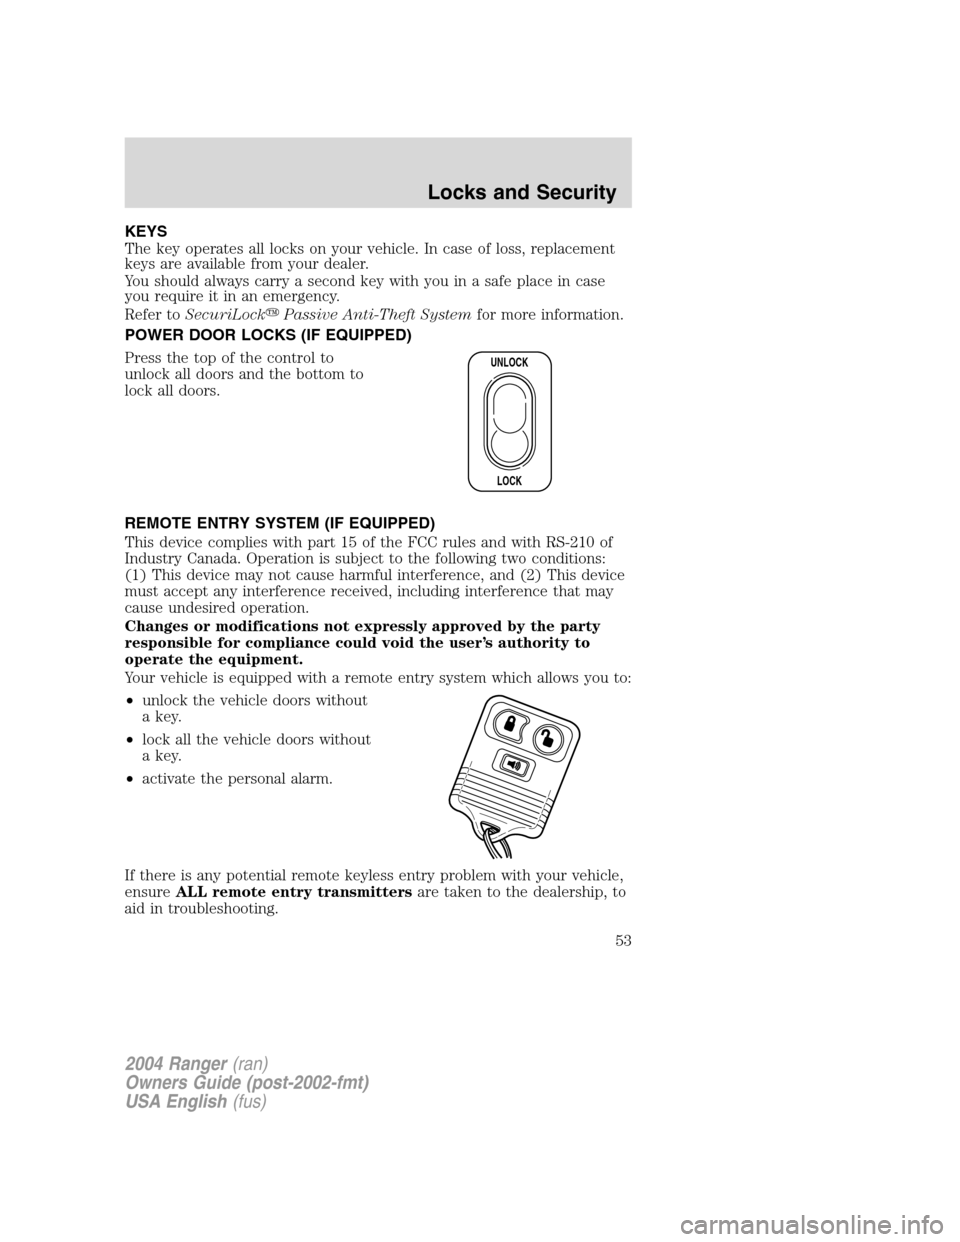 FORD RANGER 2004 2.G Owners Manual KEYS
The key operates all locks on your vehicle. In case of loss, replacement
keys are available from your dealer.
You should always carry a second key with you in a safe place in case
you require it 